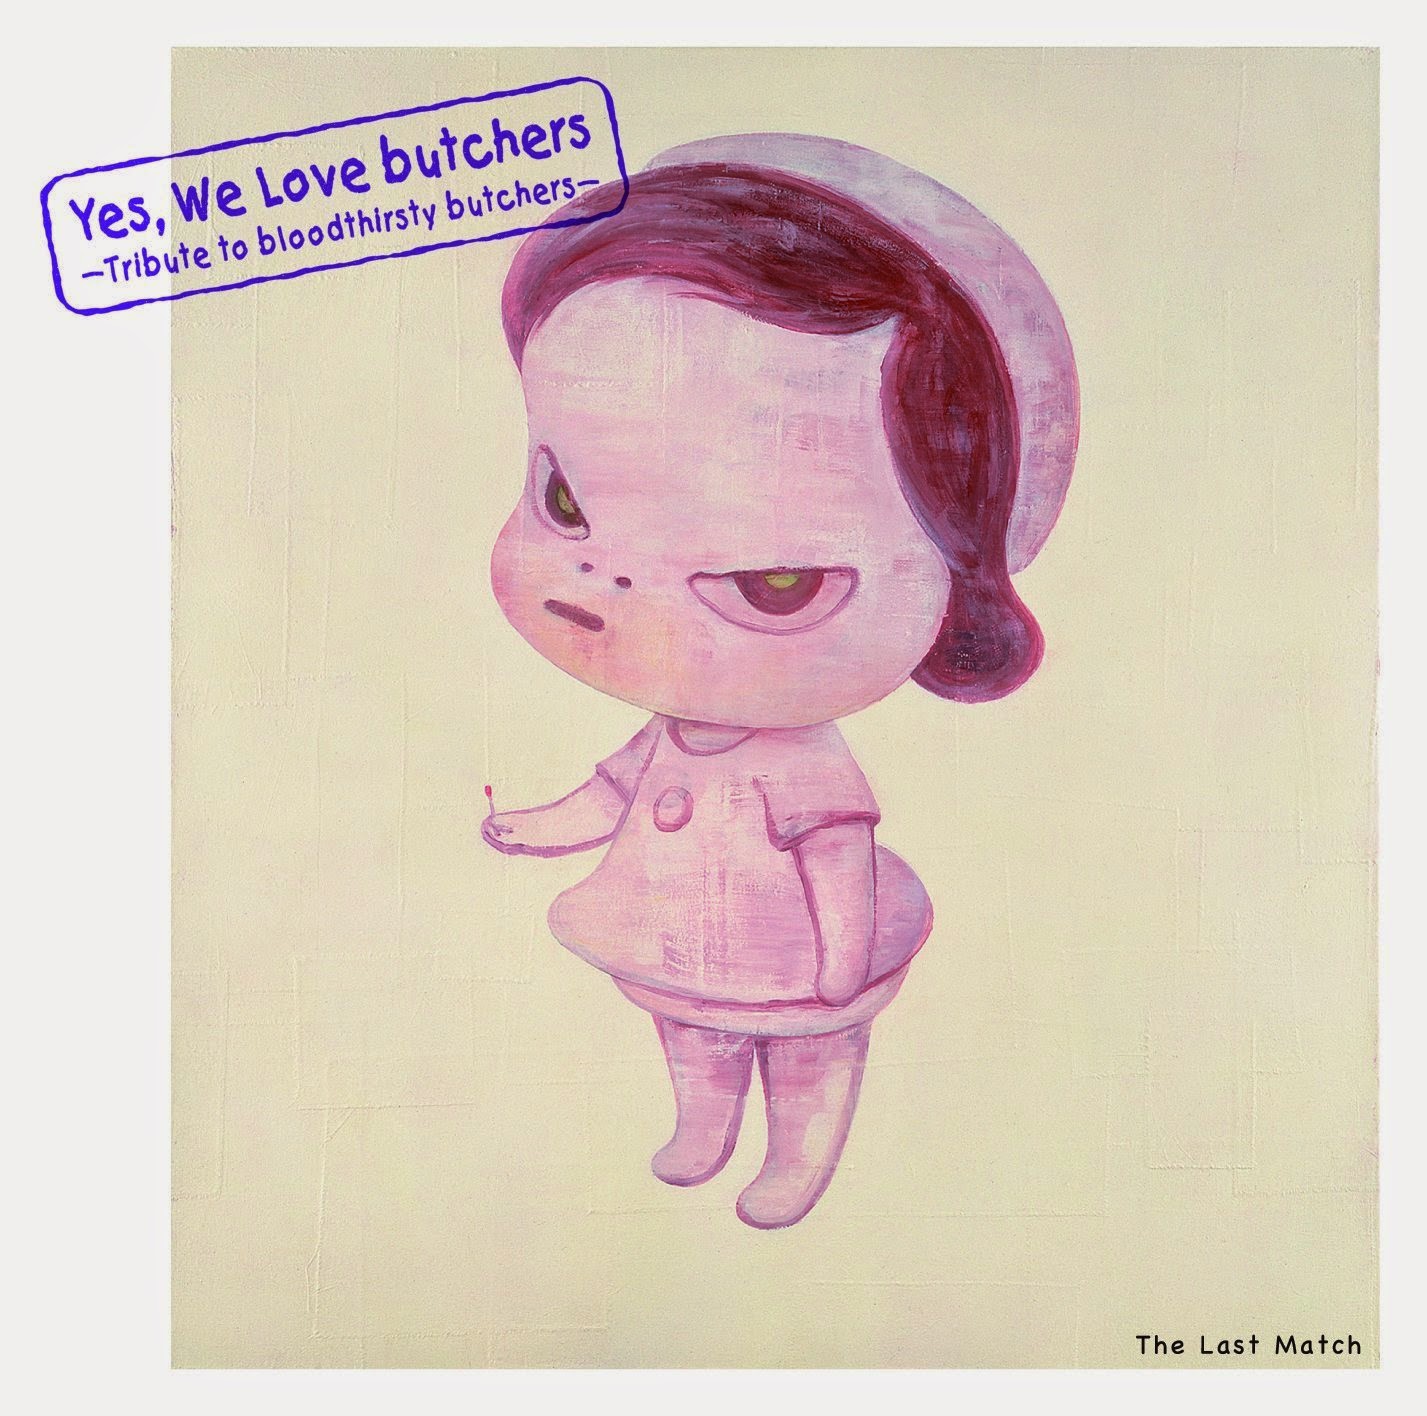 Tribute AlbumYes, We Love butchers ～Tribute to bloodthirsty butchers～ The Last Match